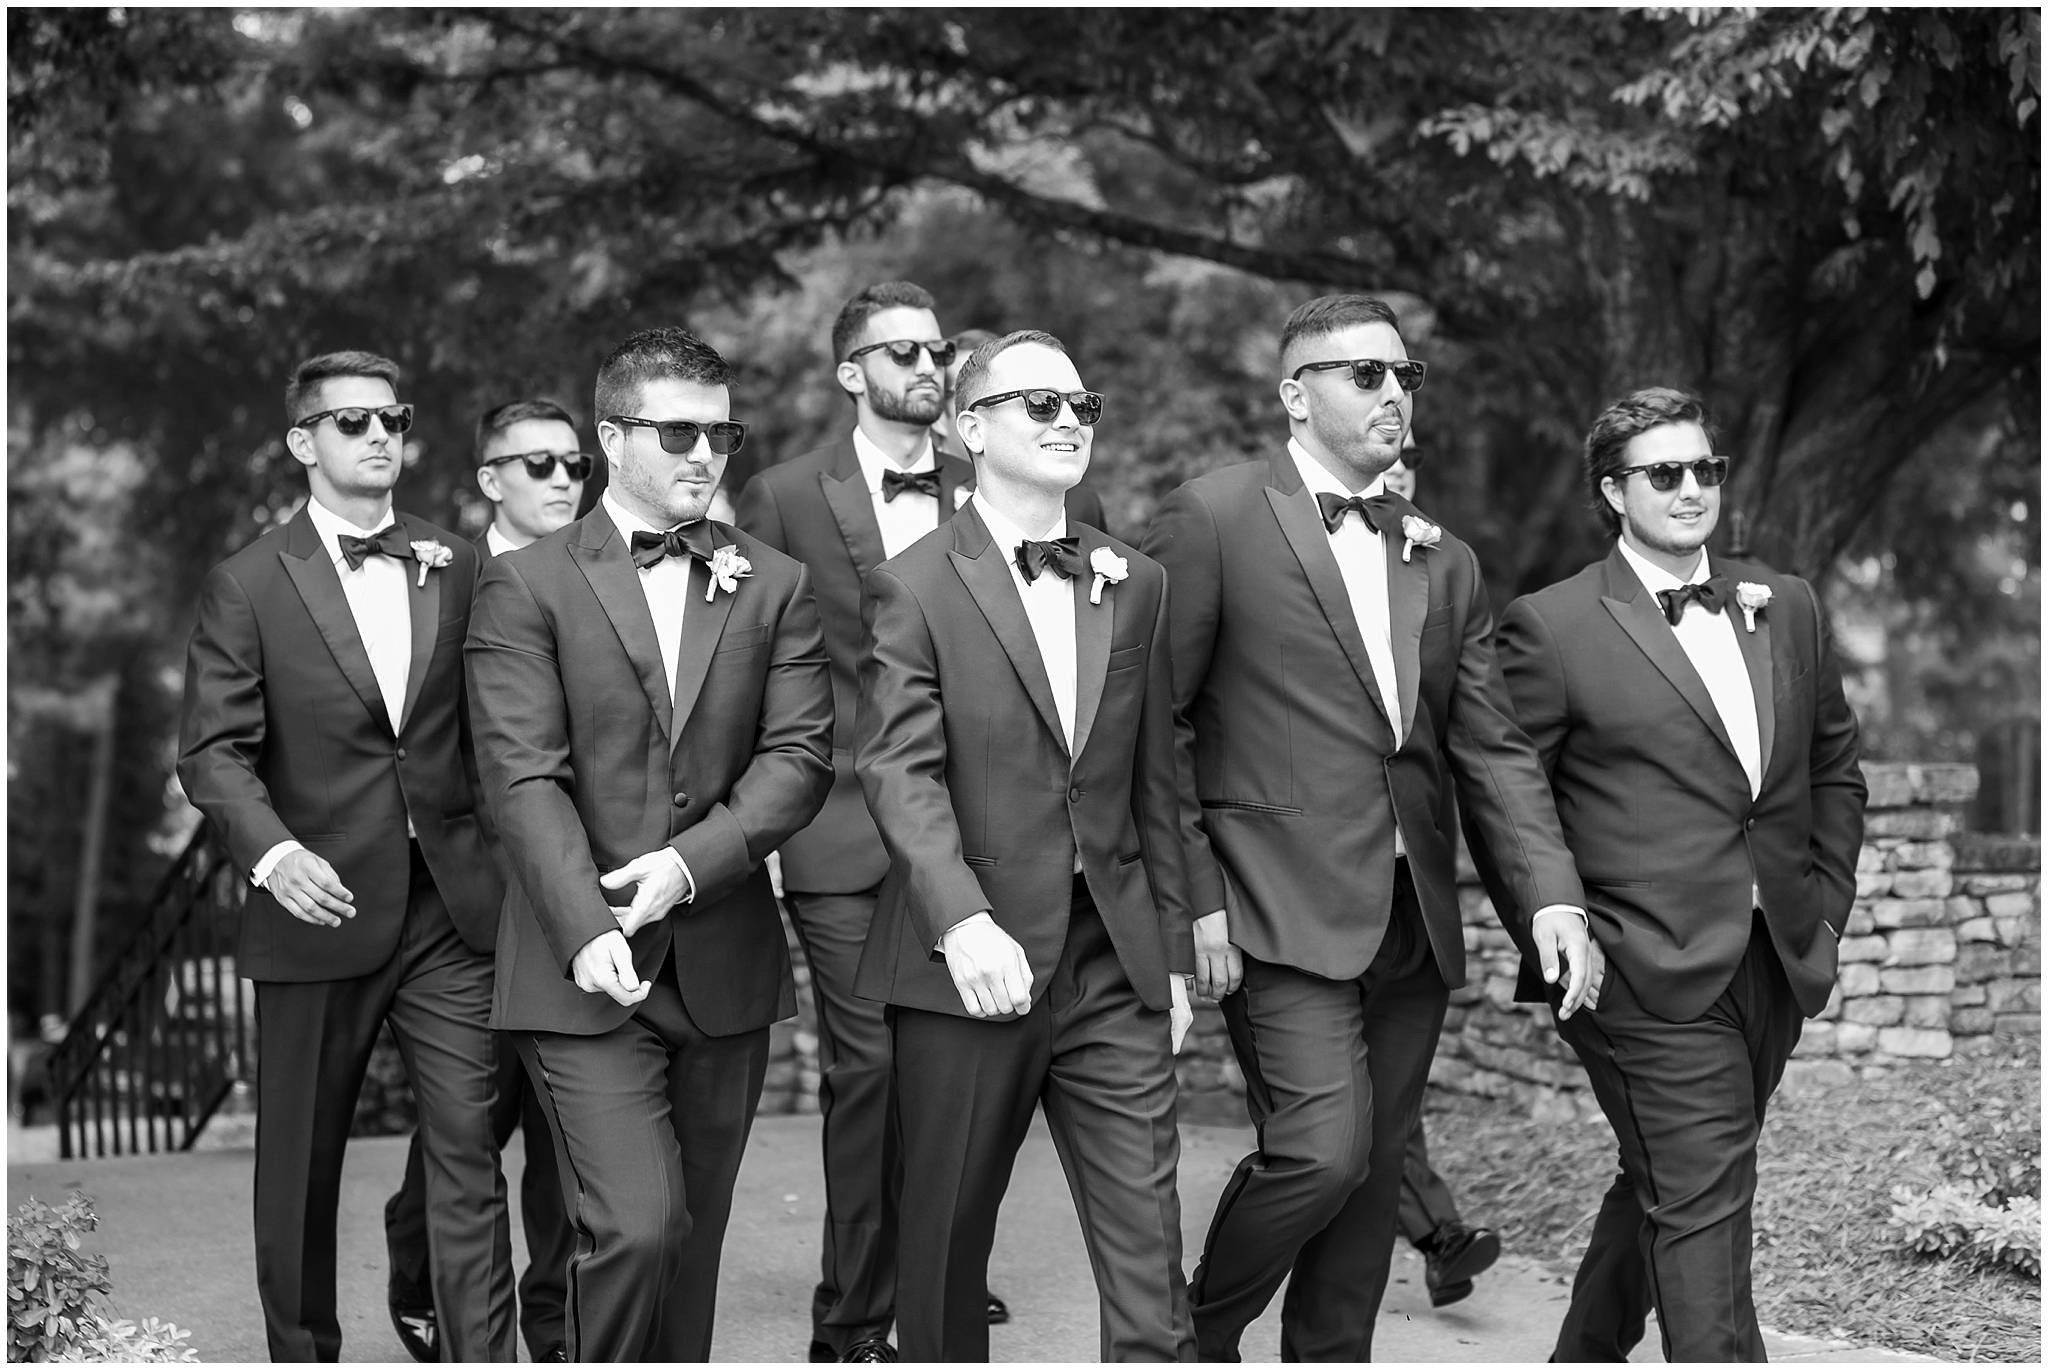 navy blue groom suits st. ives country club wedding pictures